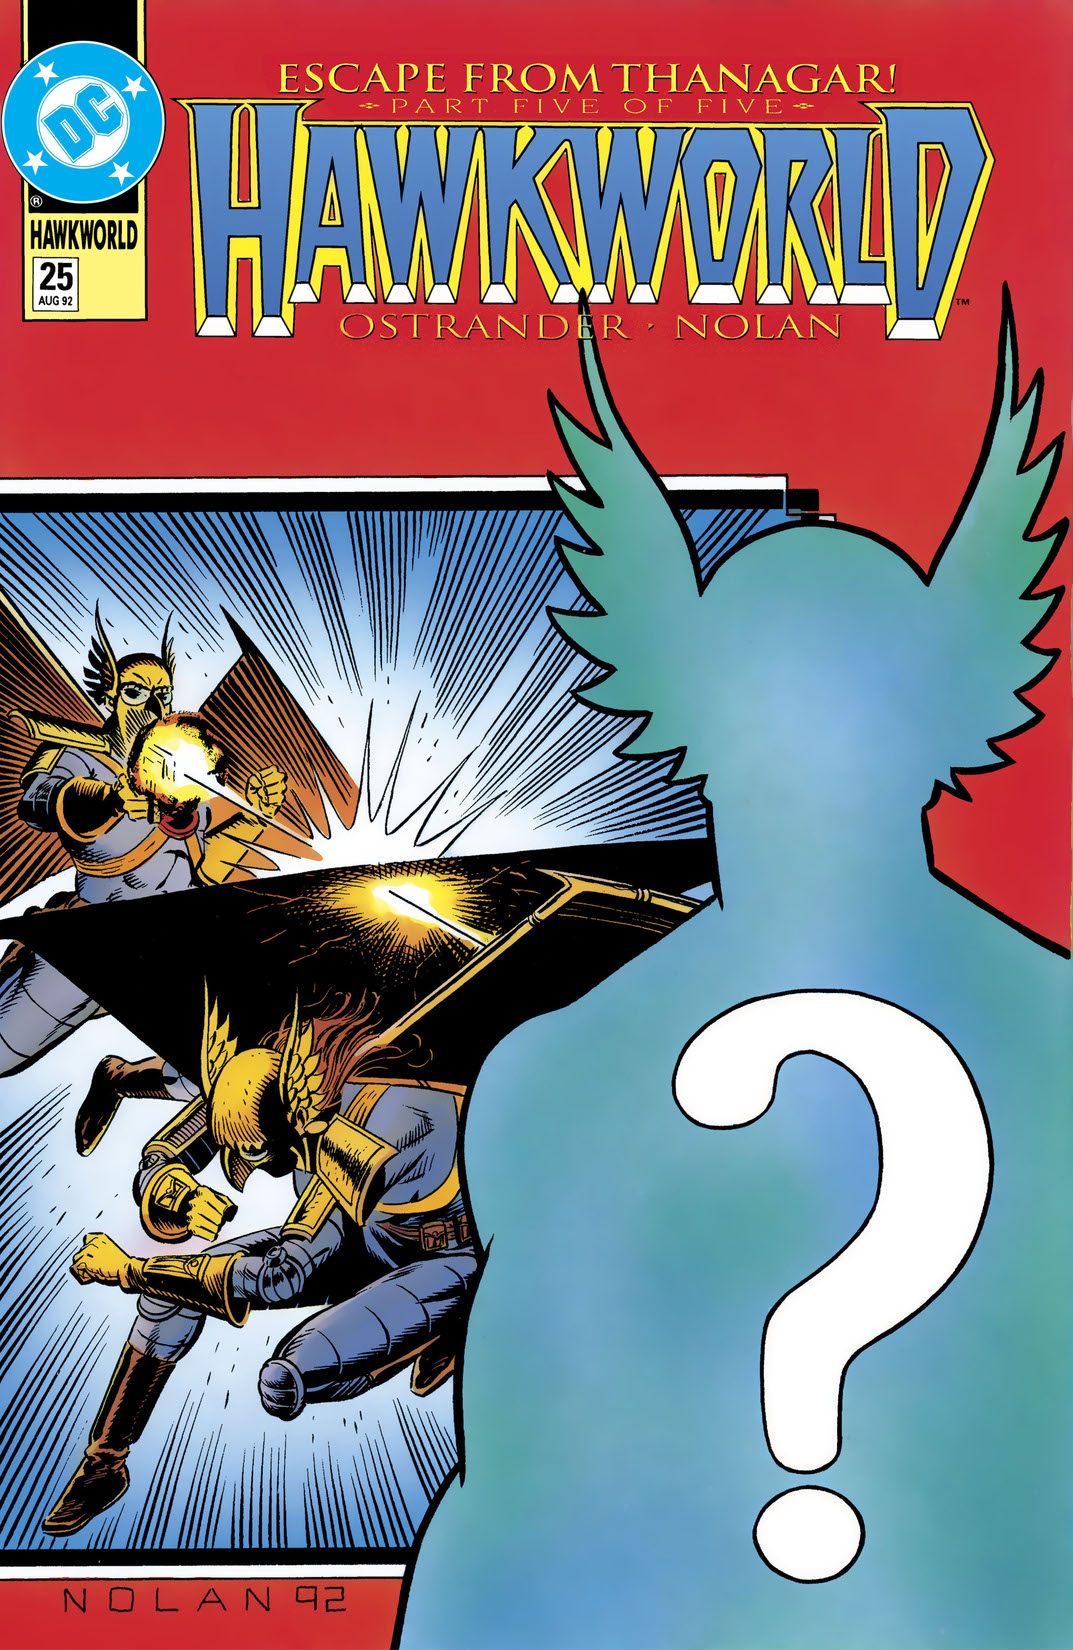 Hawkworld (1989-) #25 preview images